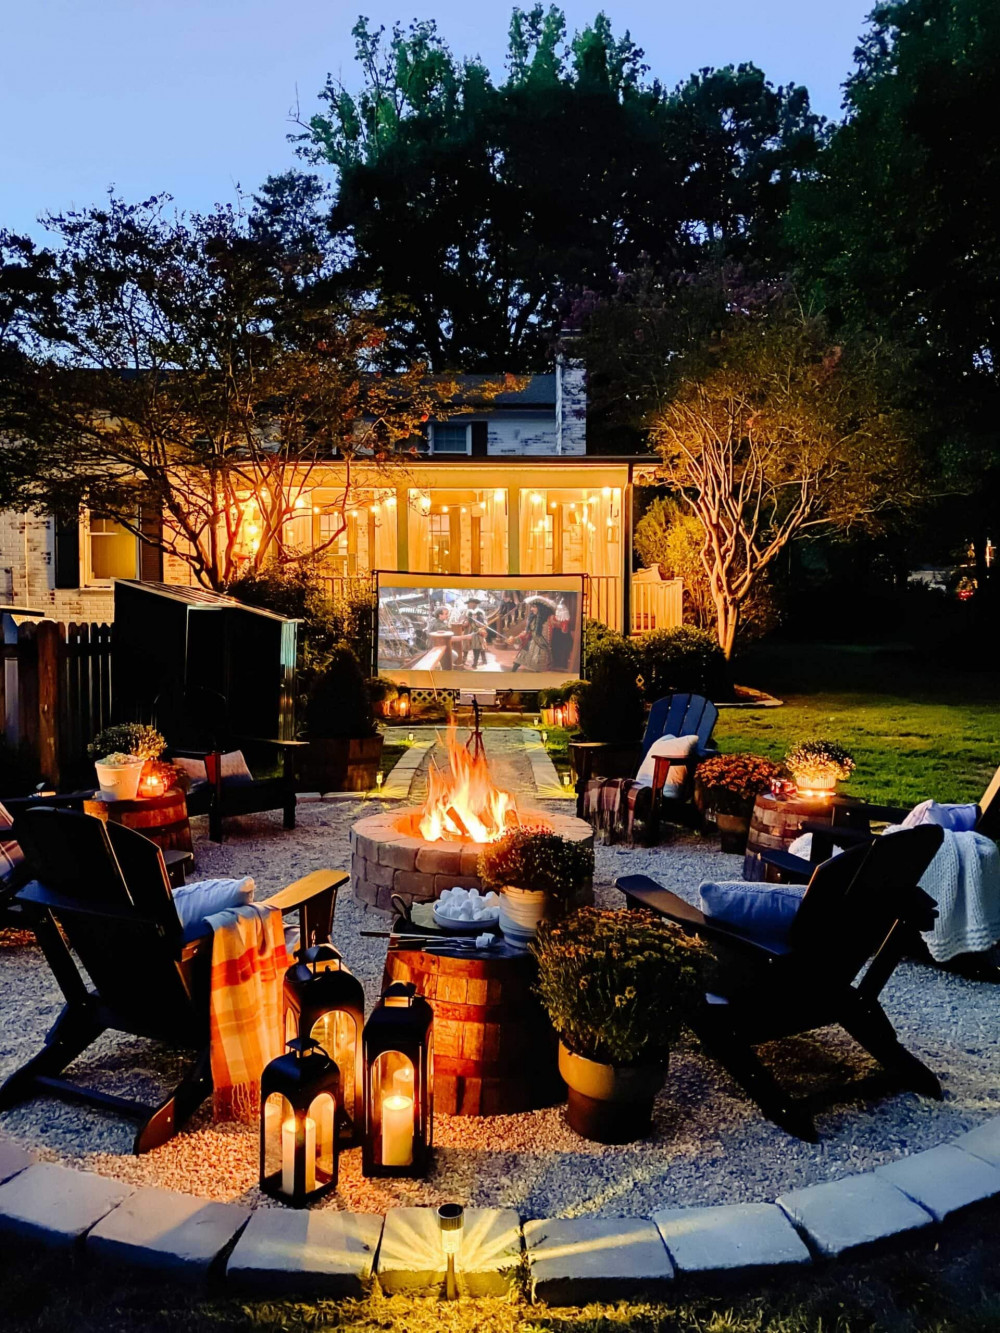 24 Landscaping Ideas To Revitalize Your Backyard - 151